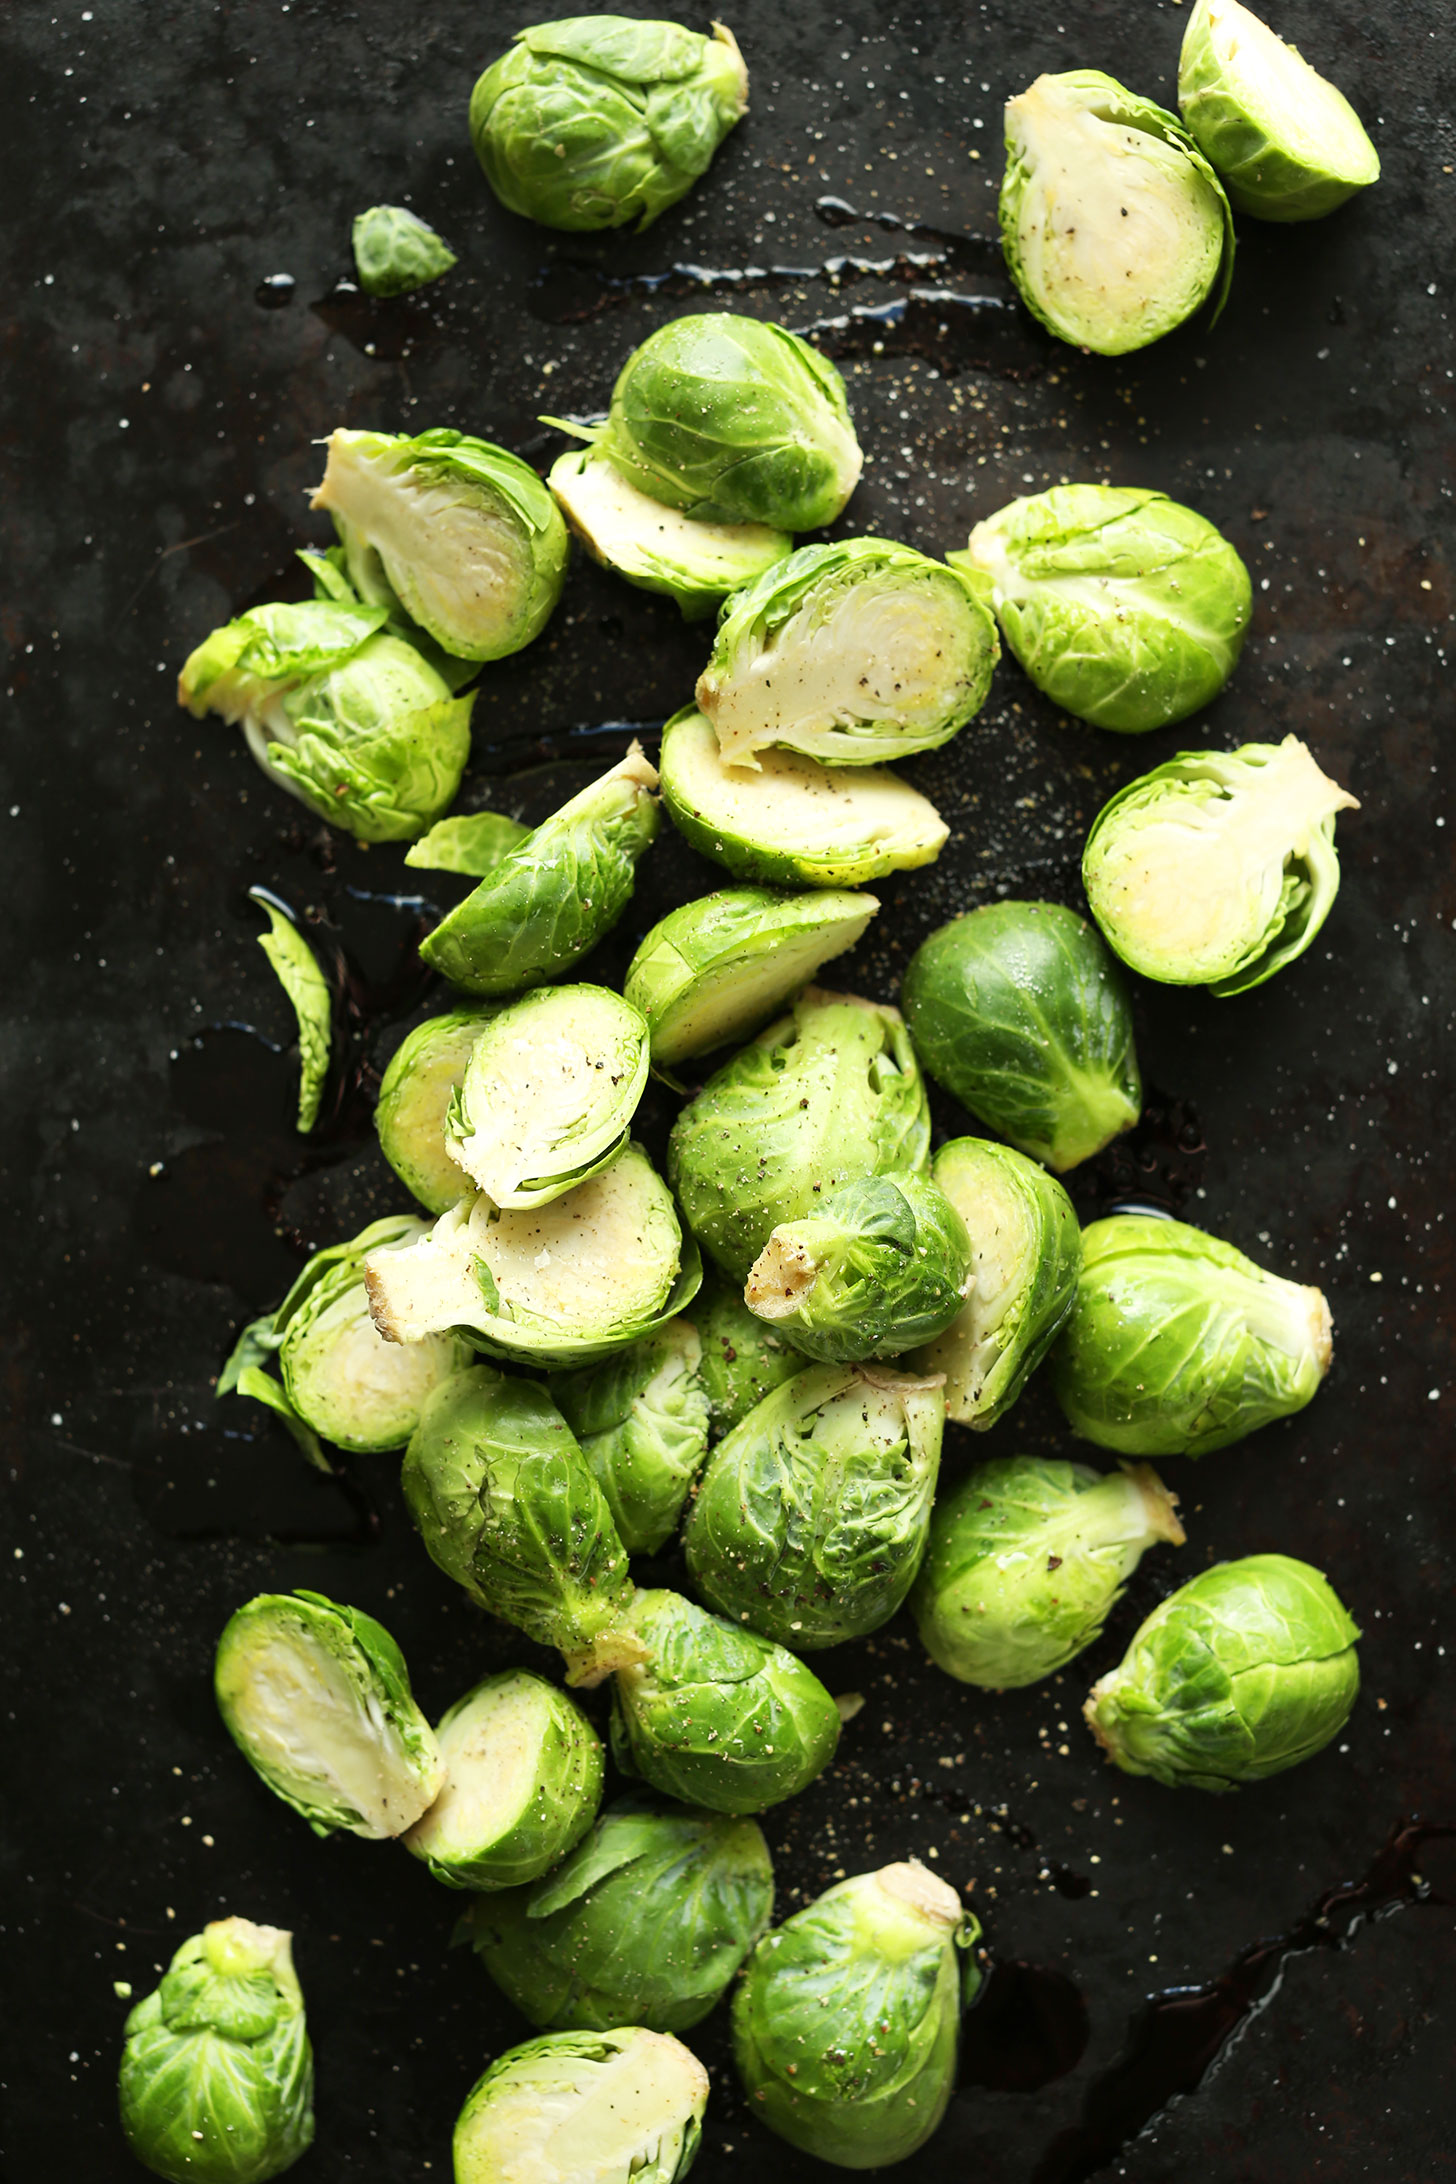 Baking sheet with Bruseels Sprouts ready to be roasted for a gluten-free plant-based meal